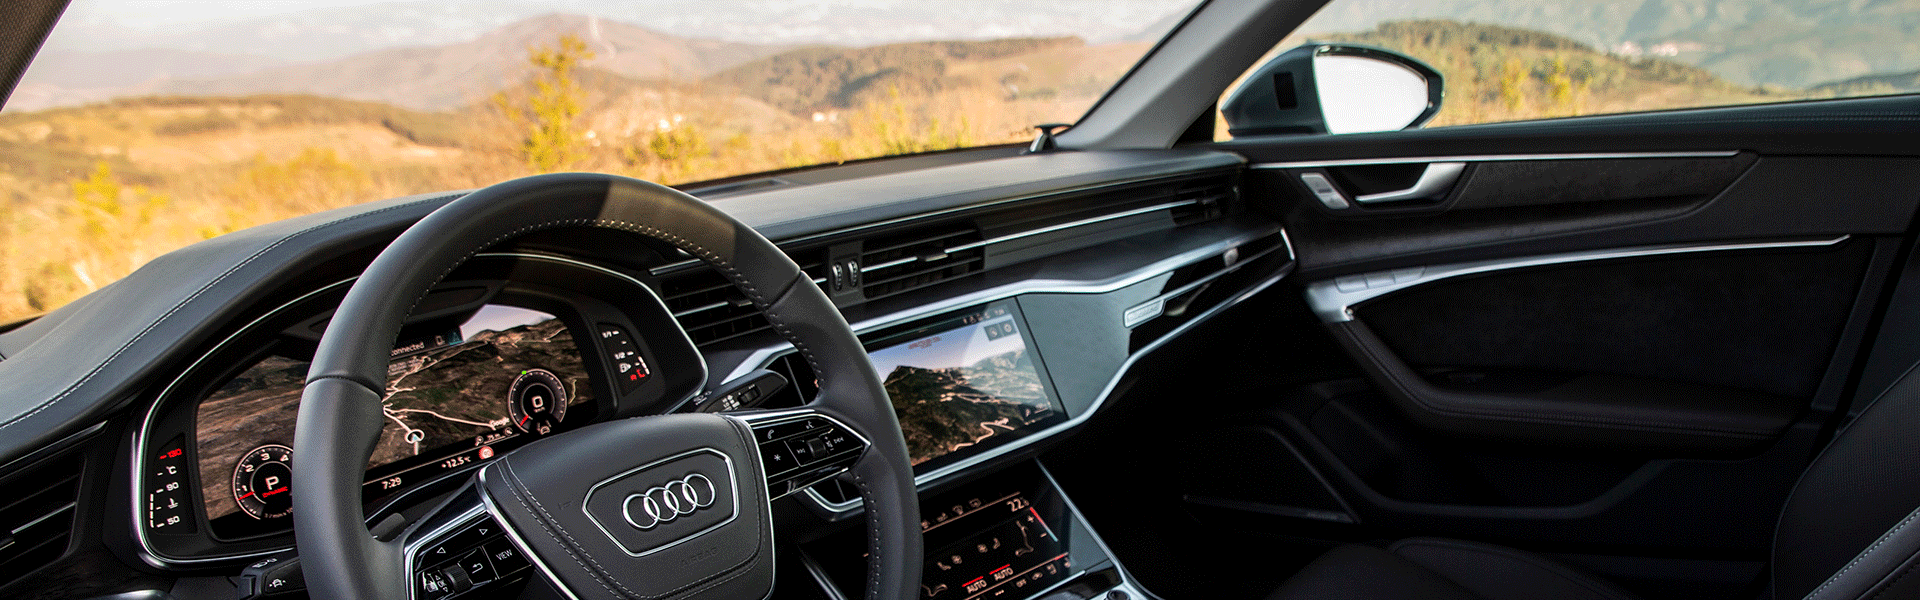 Discover the advantages of Audi connect. Audi digital services bring more comfort and safety into your everyday life.